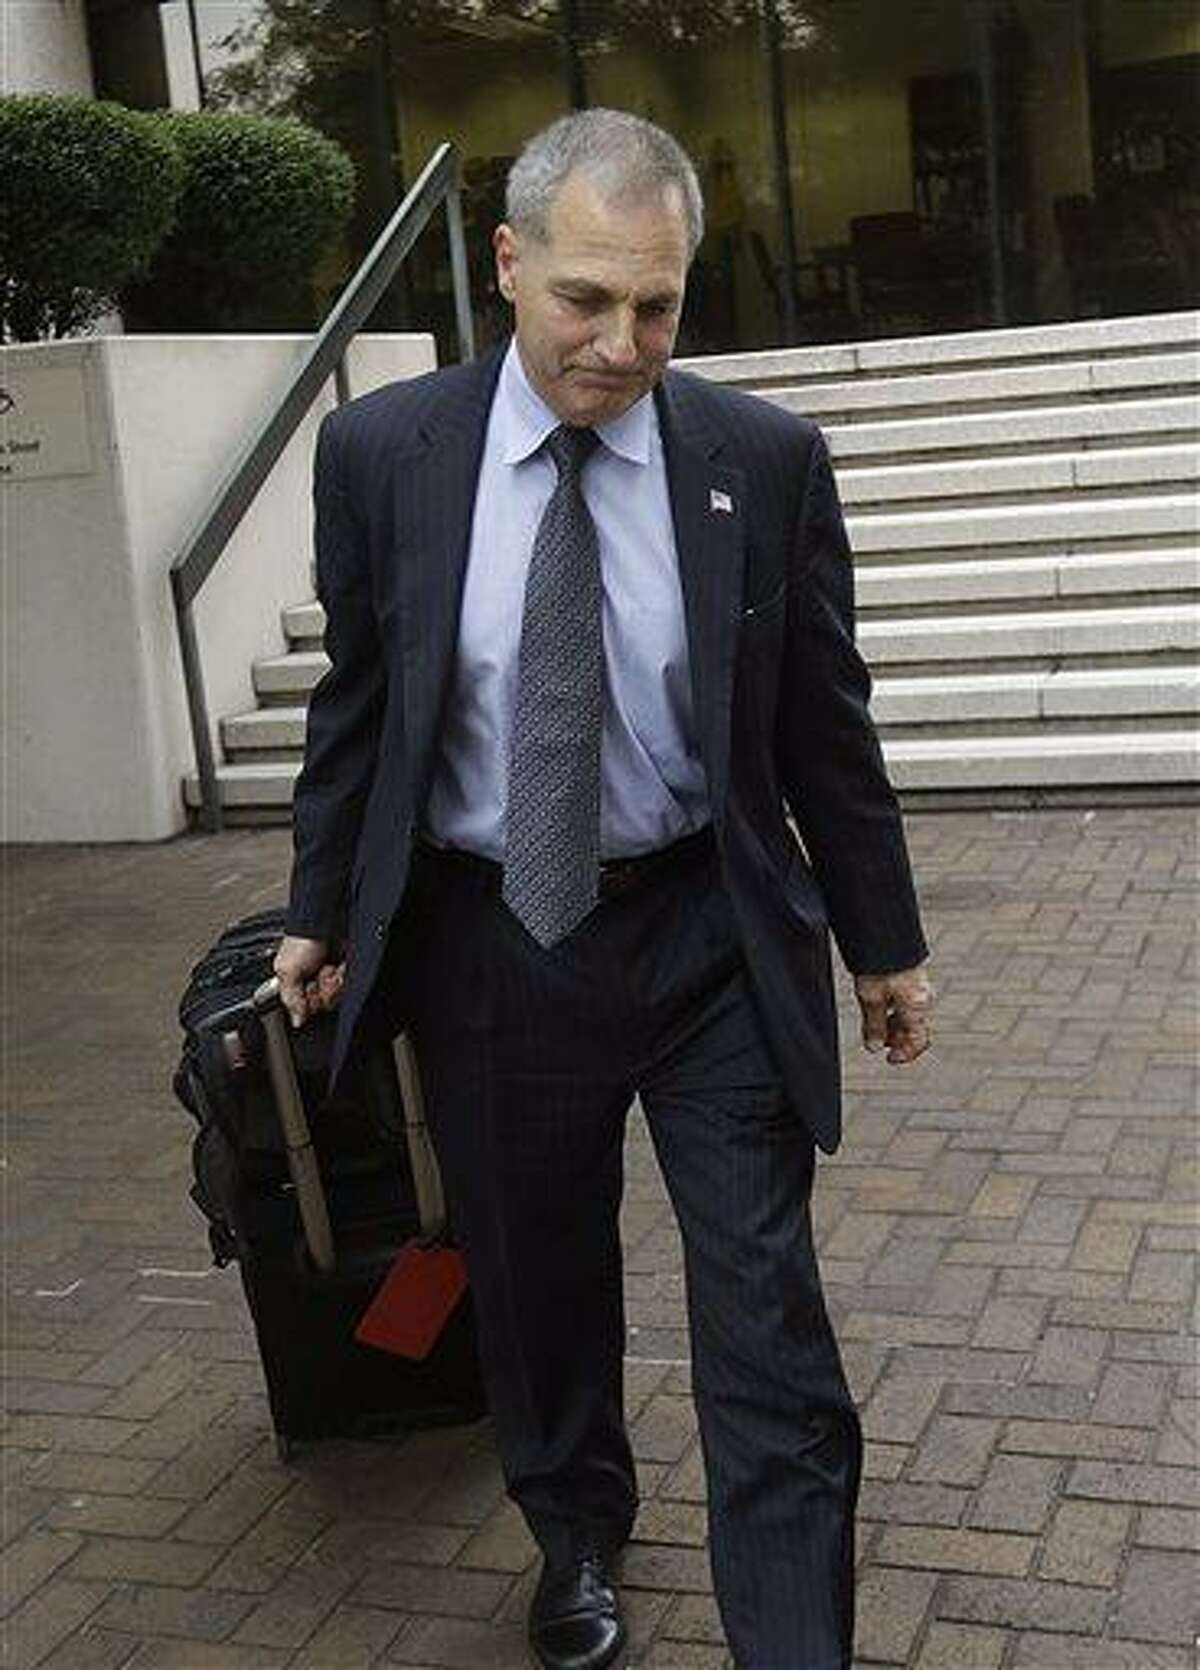 Former FBI Director Louis Freeh leaves Federal Court after meeting with U.S. District Judge Carl Barbier in New Orleans, Tuesday, July 2, 2013. Barbier appointed Freeh to investigate alleged misconduct by a lawyer who helped run BP's multibillion-dollar settlement fund. (AP Photo/Gerald Herbert)